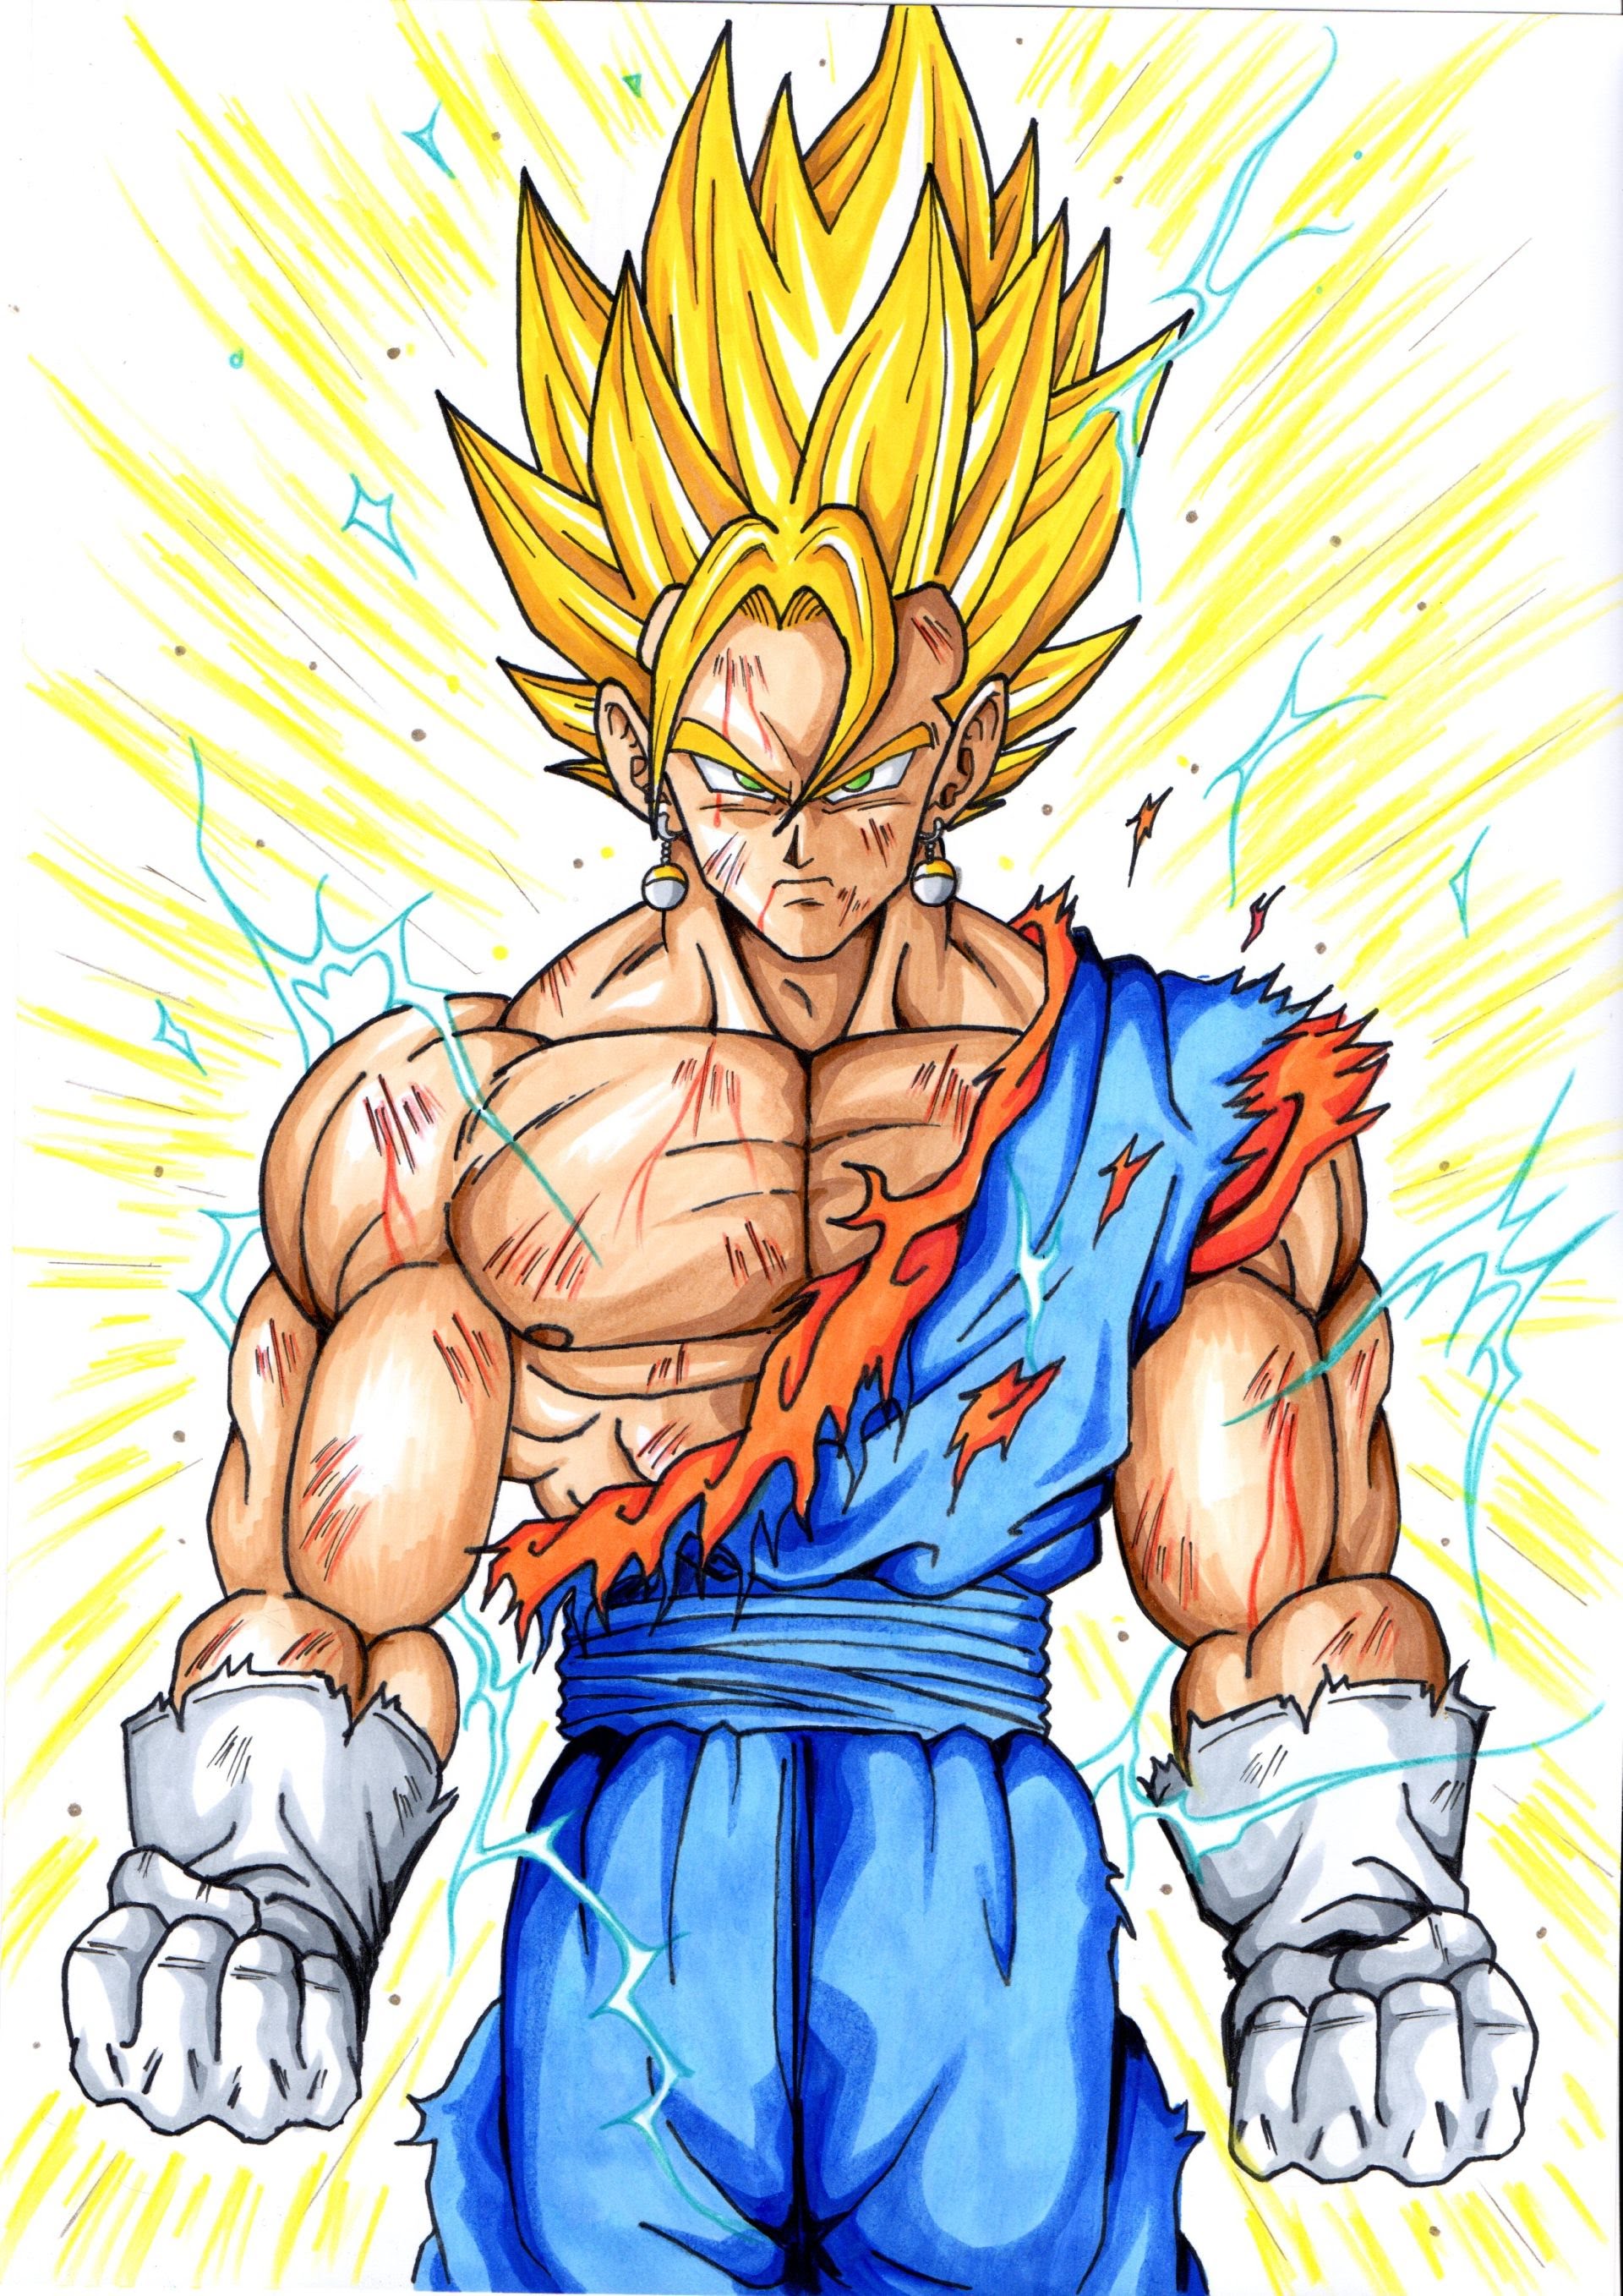 Dragon Ball Z Drawing at GetDrawings.com | Free for personal use Dragon